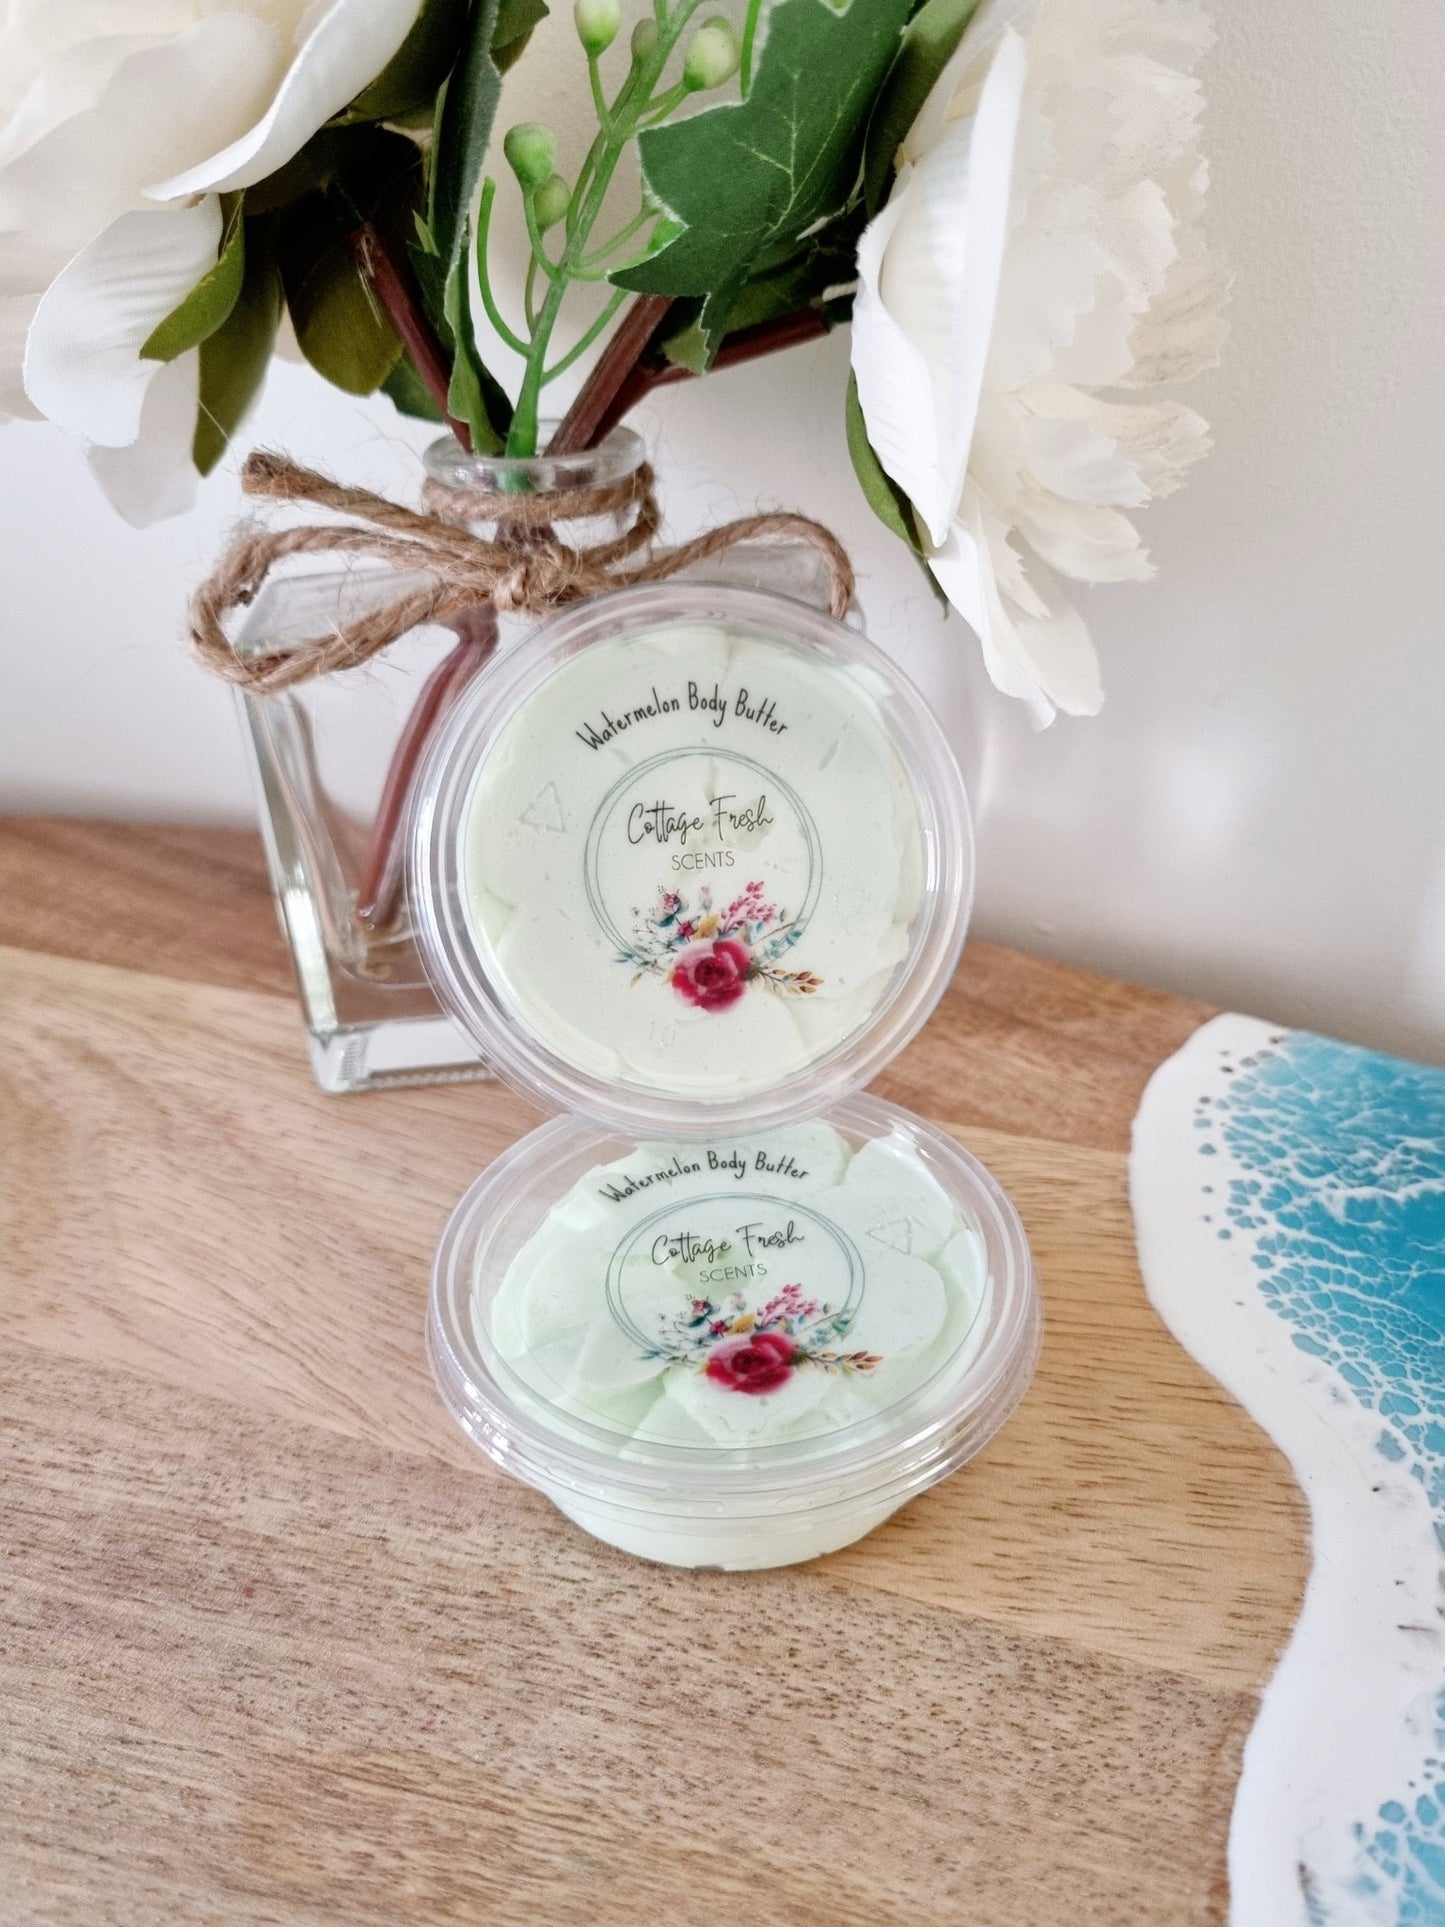 Refreshing Watermelon Luxury Whipped Body Butter Mousse - Body Butter - Cottage Fresh Scents